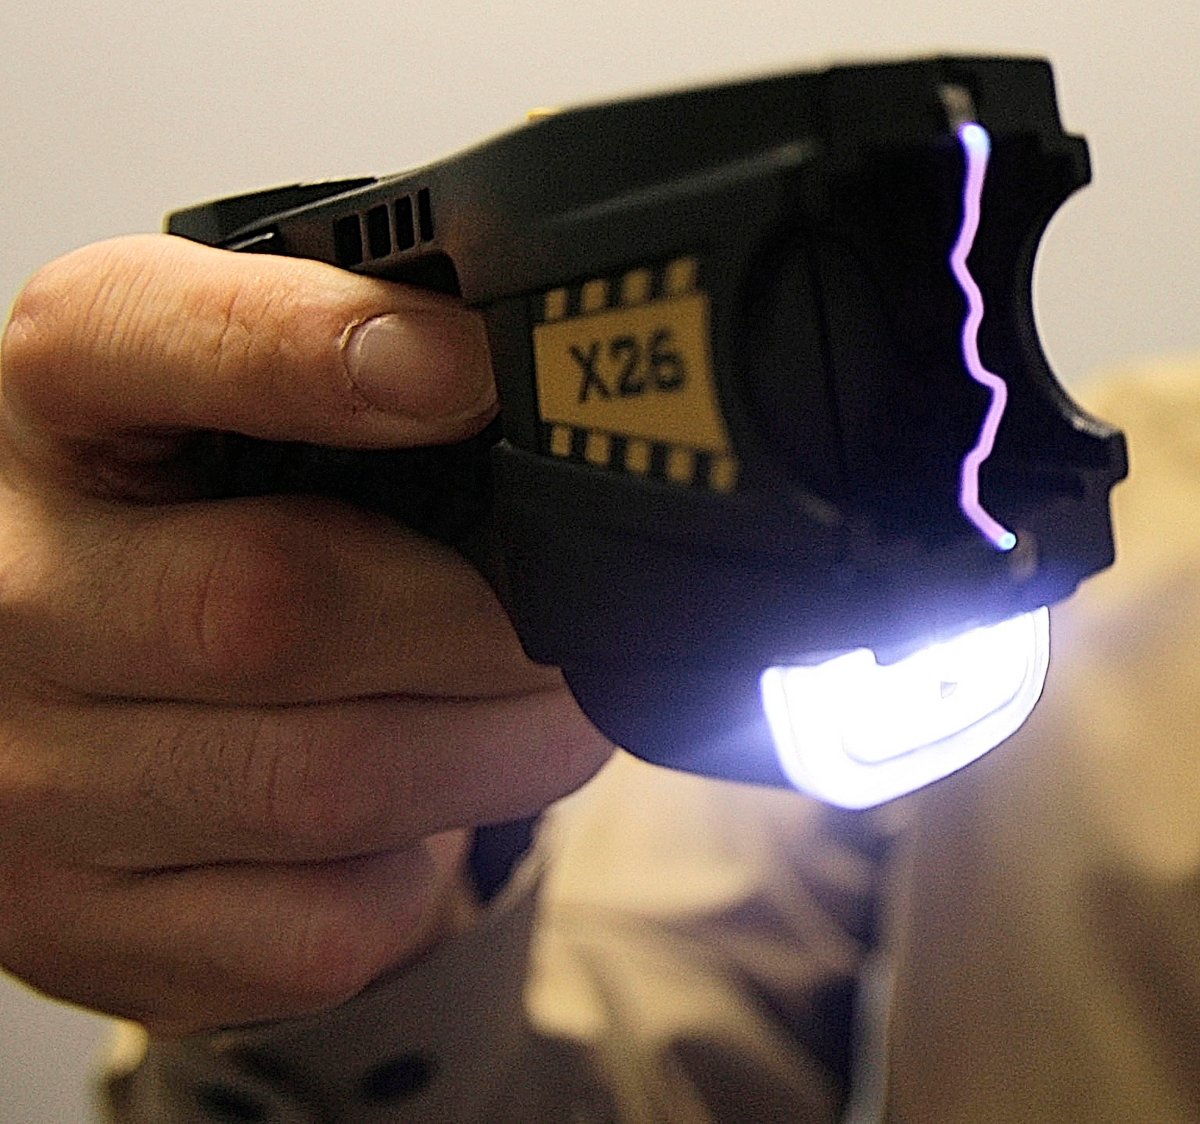 Peterborough police used a stun gun to assist in the arrest of a man in Cavan-Monaghan Township on June 13, 2022.